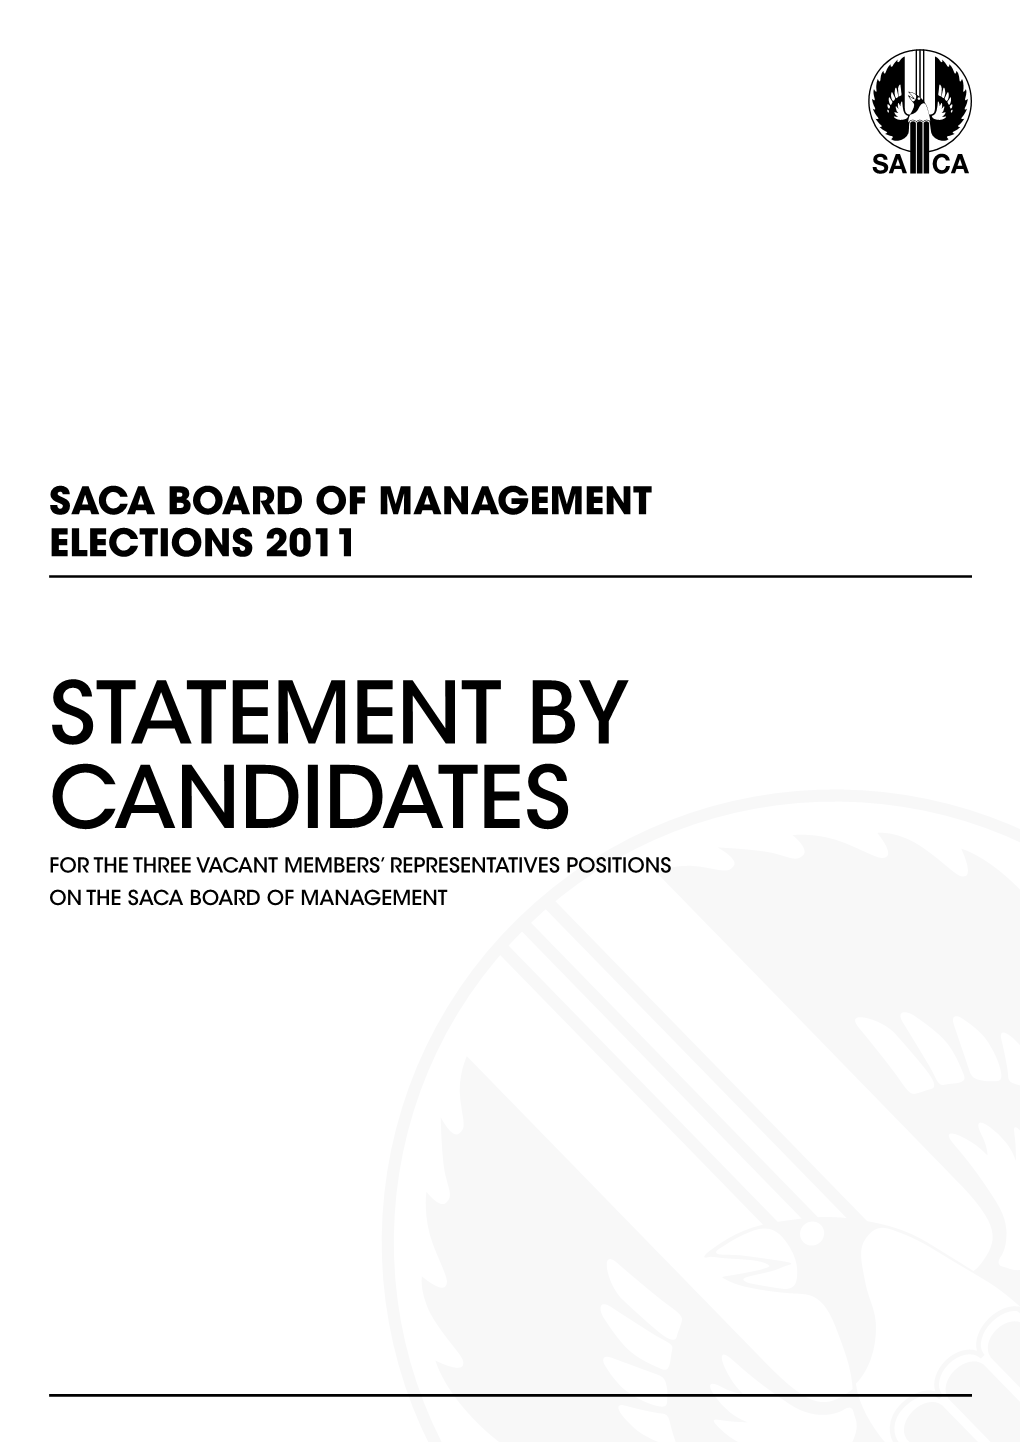 STATEMENT by CANDIDATES for the Three VACANT Members’ Representatives POSITIONS on the SACA Board of Management